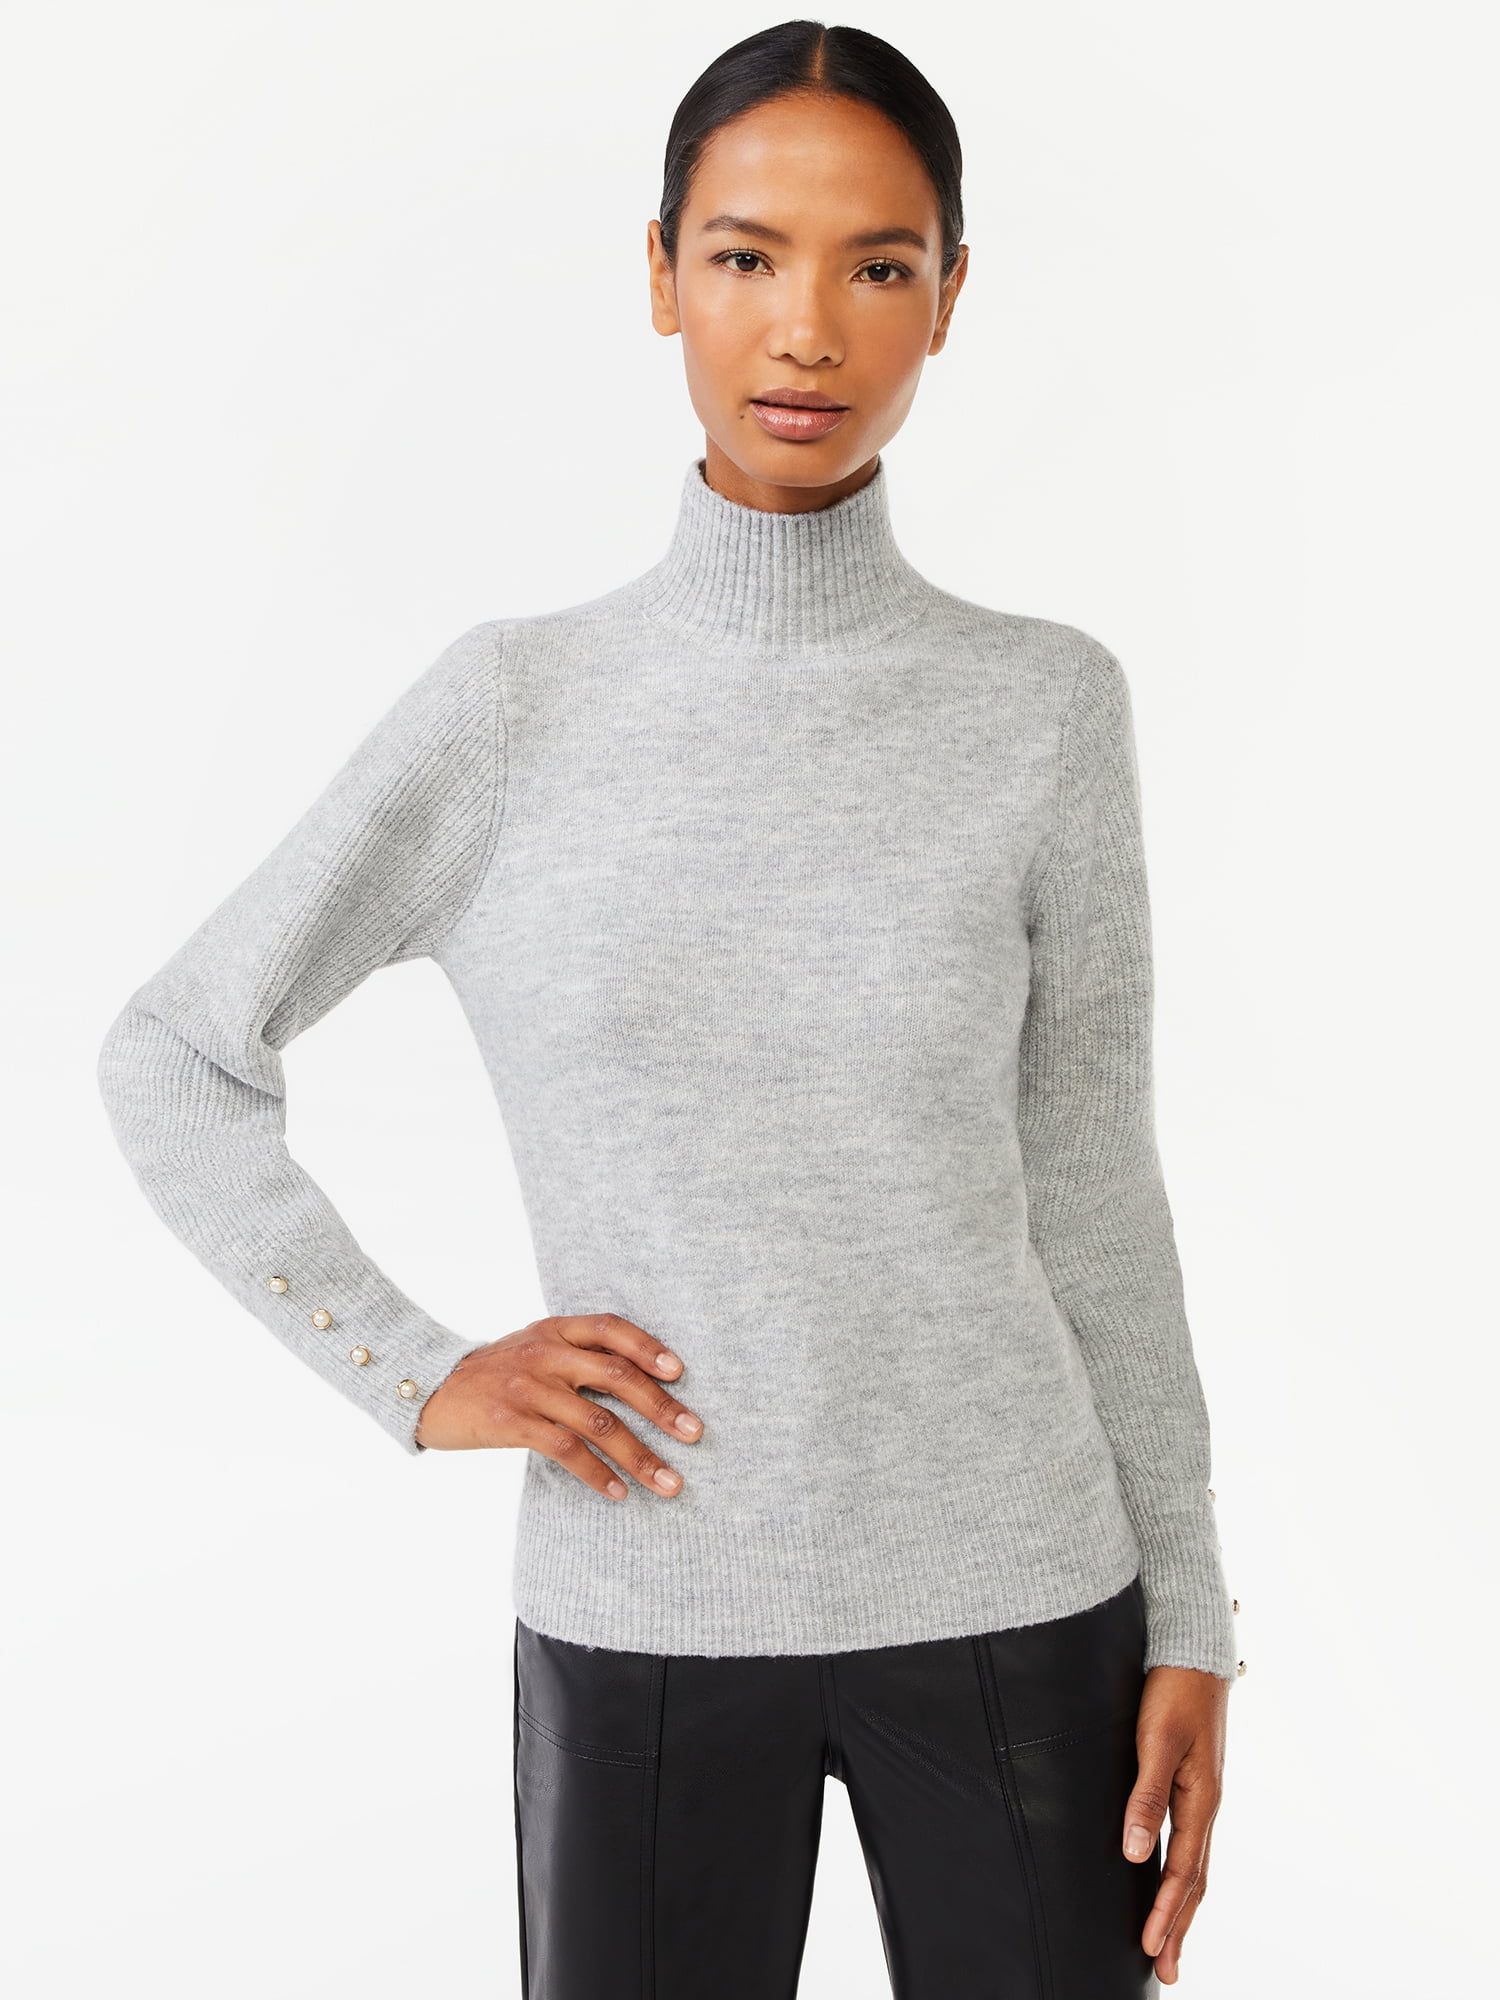 Scoop Women's Long Sleeve Turtleneck Sweater with Button Cuffs ...